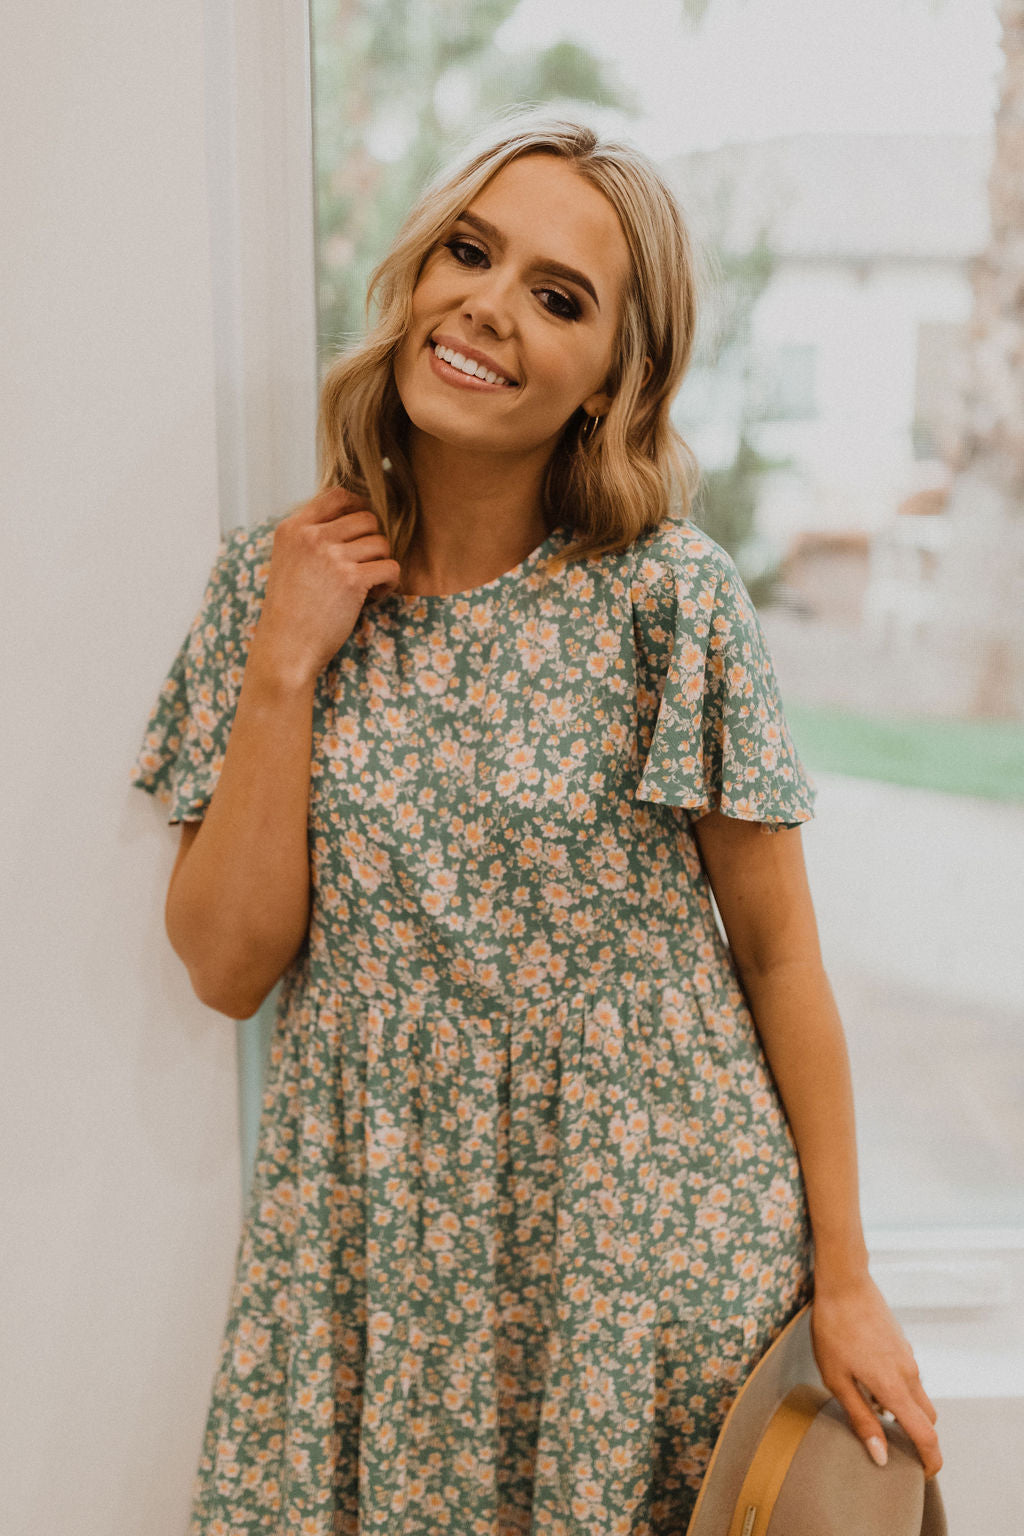 THE SPRING FLING TIERED FLORAL DRESS IN SAGE